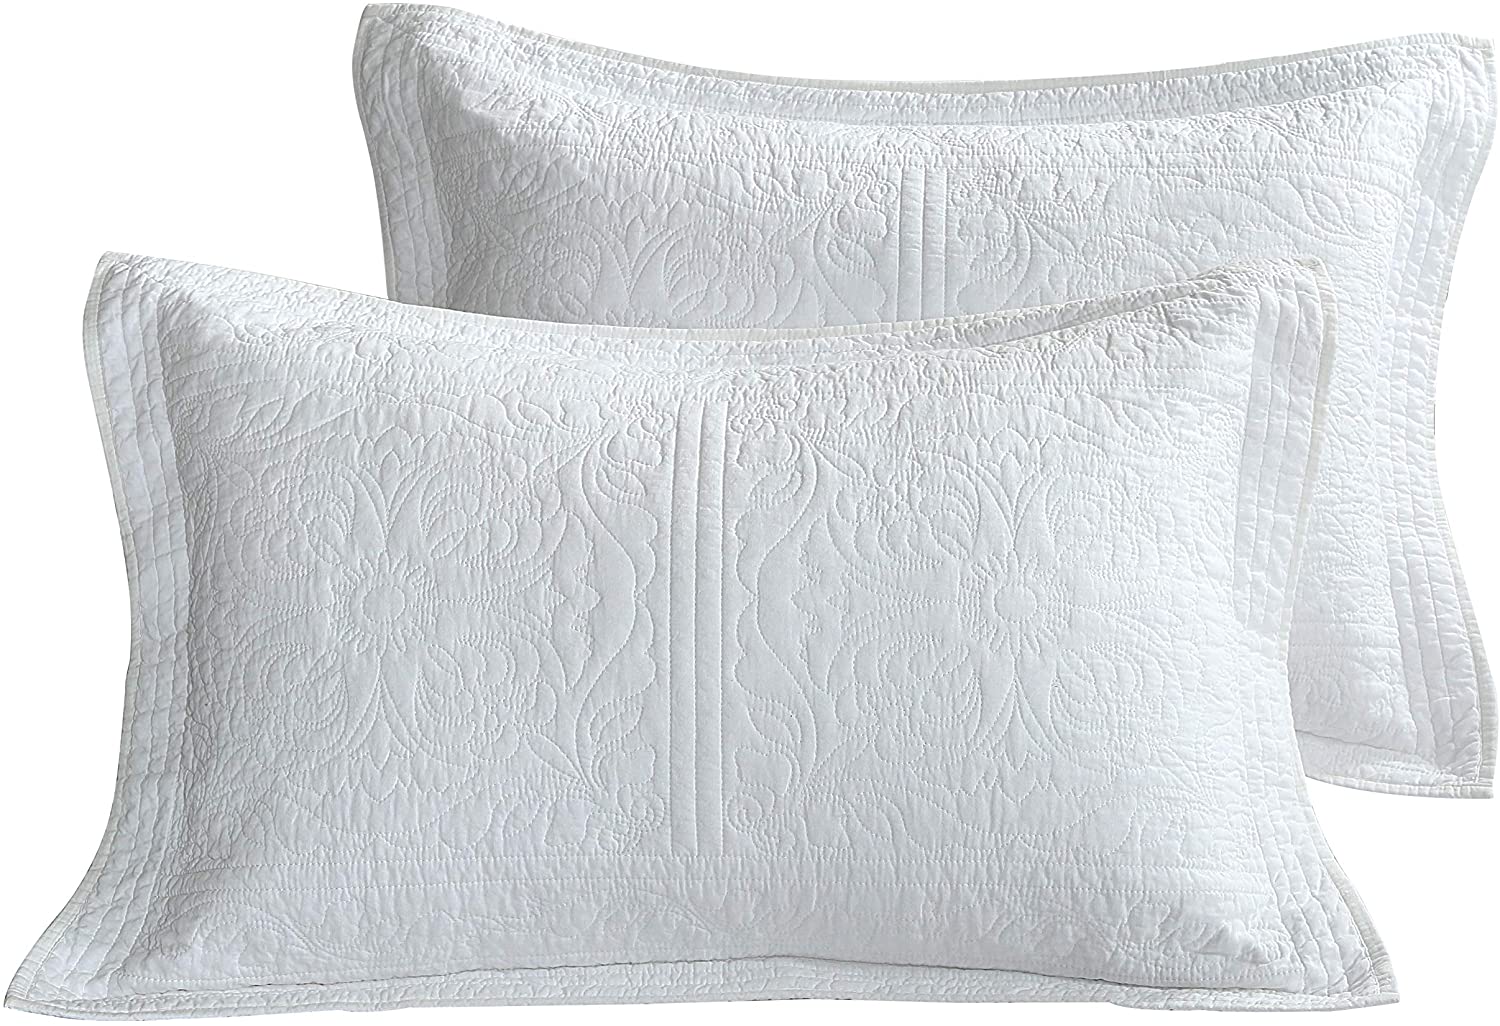 WINLIFE 2-Pack Quilted Cotton Floral Pillow Shams